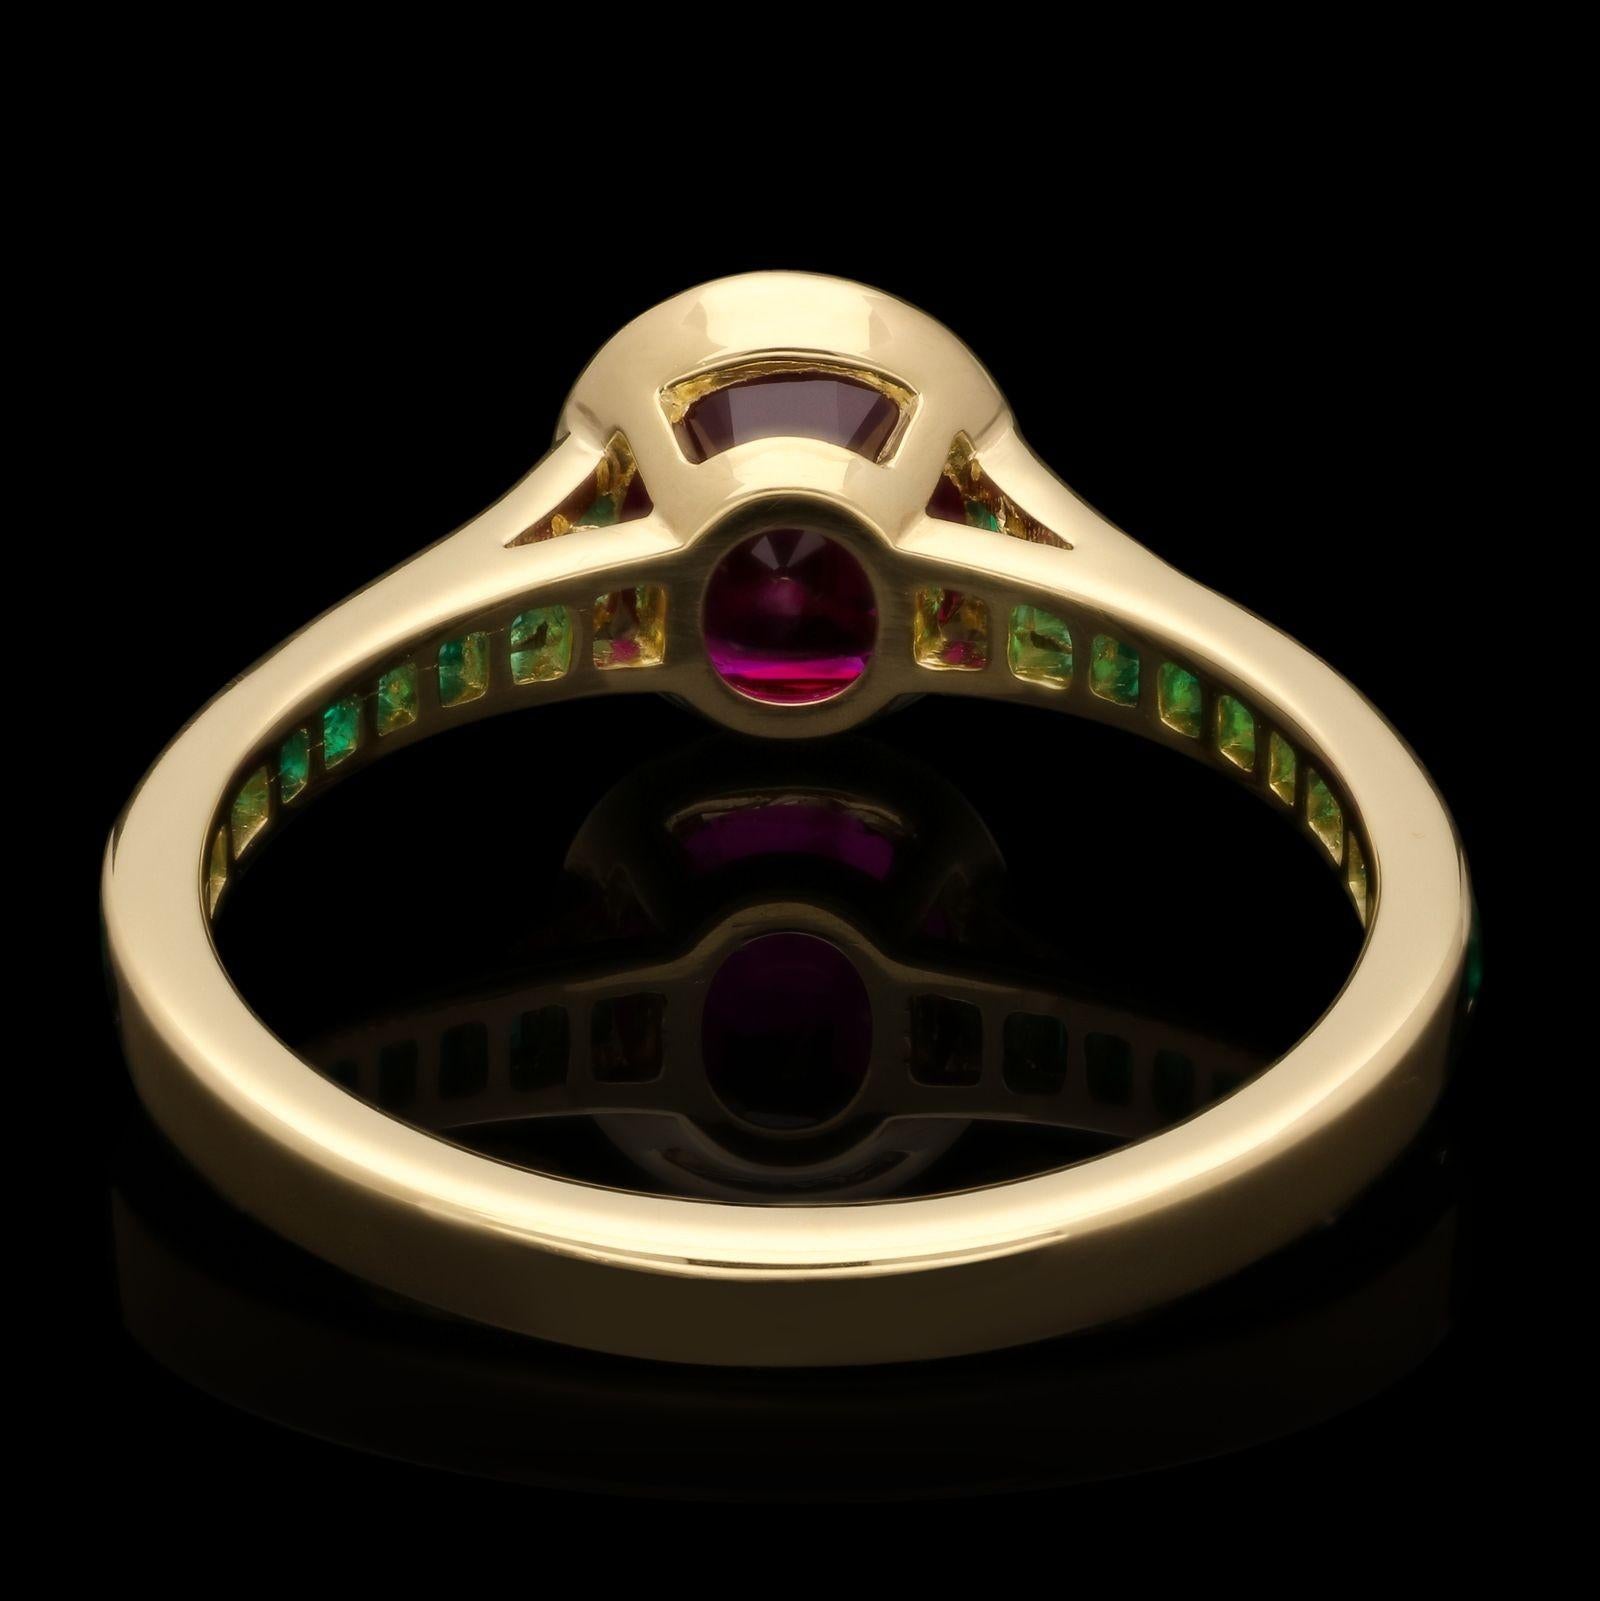 Hancocks 1.58ct Burmese Ruby And Emerald Ring In 18ct Yellow Gold Contemporary In New Condition For Sale In London, GB